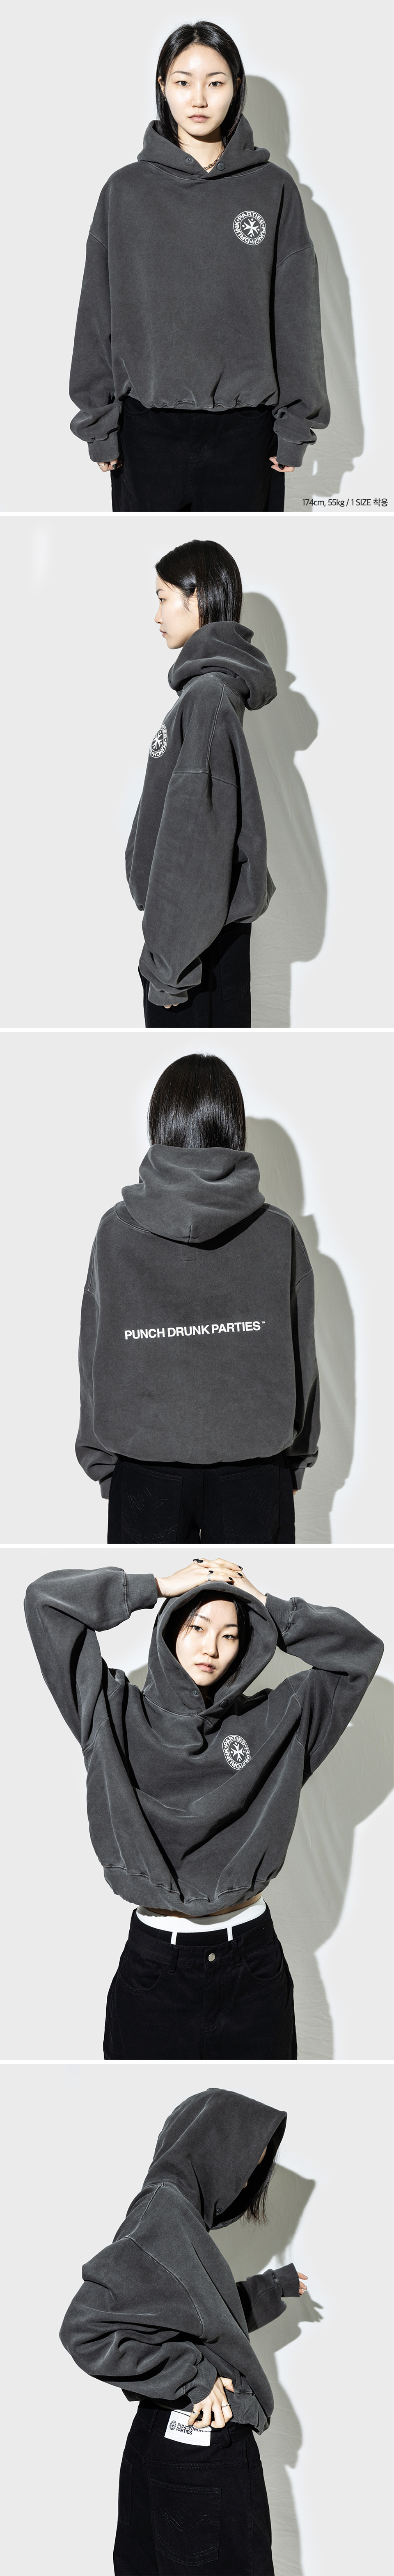 PUNCH DRUNK PARTIES パーカー